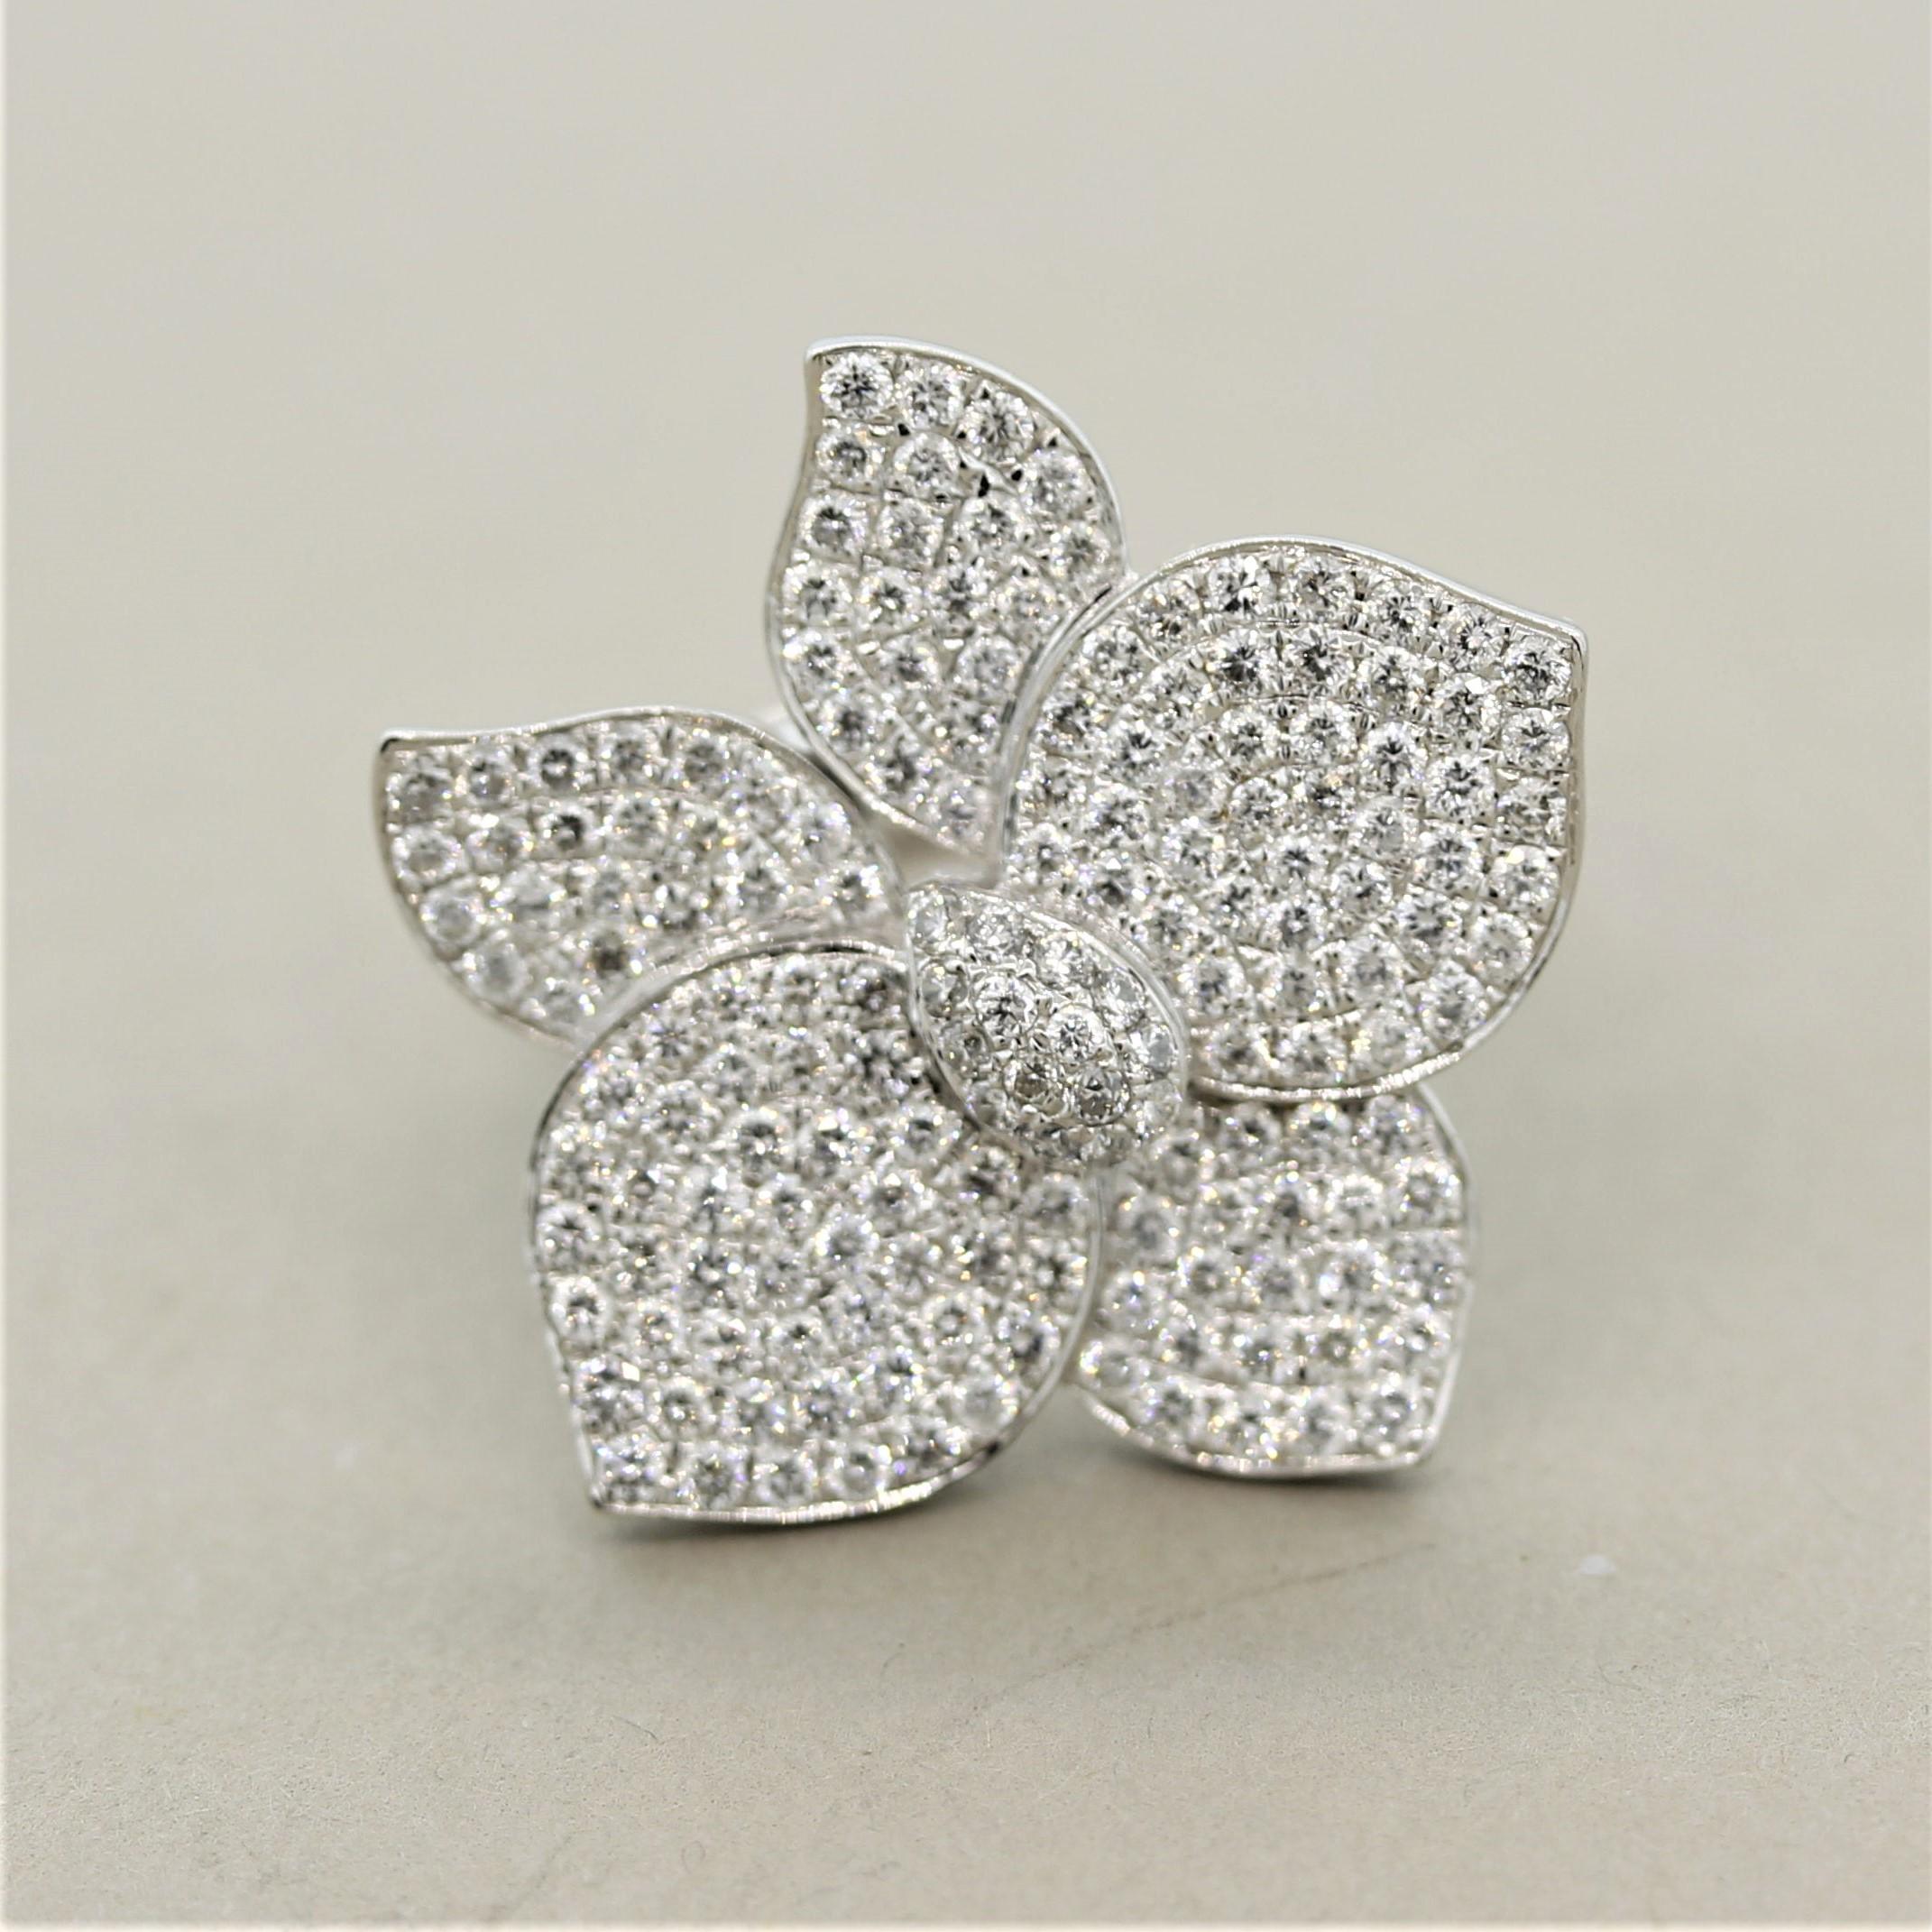 A sweet and stylish cocktail ring! It features 1.70 carats of round brilliant cut diamonds which are pave set over the 5 flower petals and the center piston. Some of the petals are articulated and angled giving the piece a 3-dimensional appearance